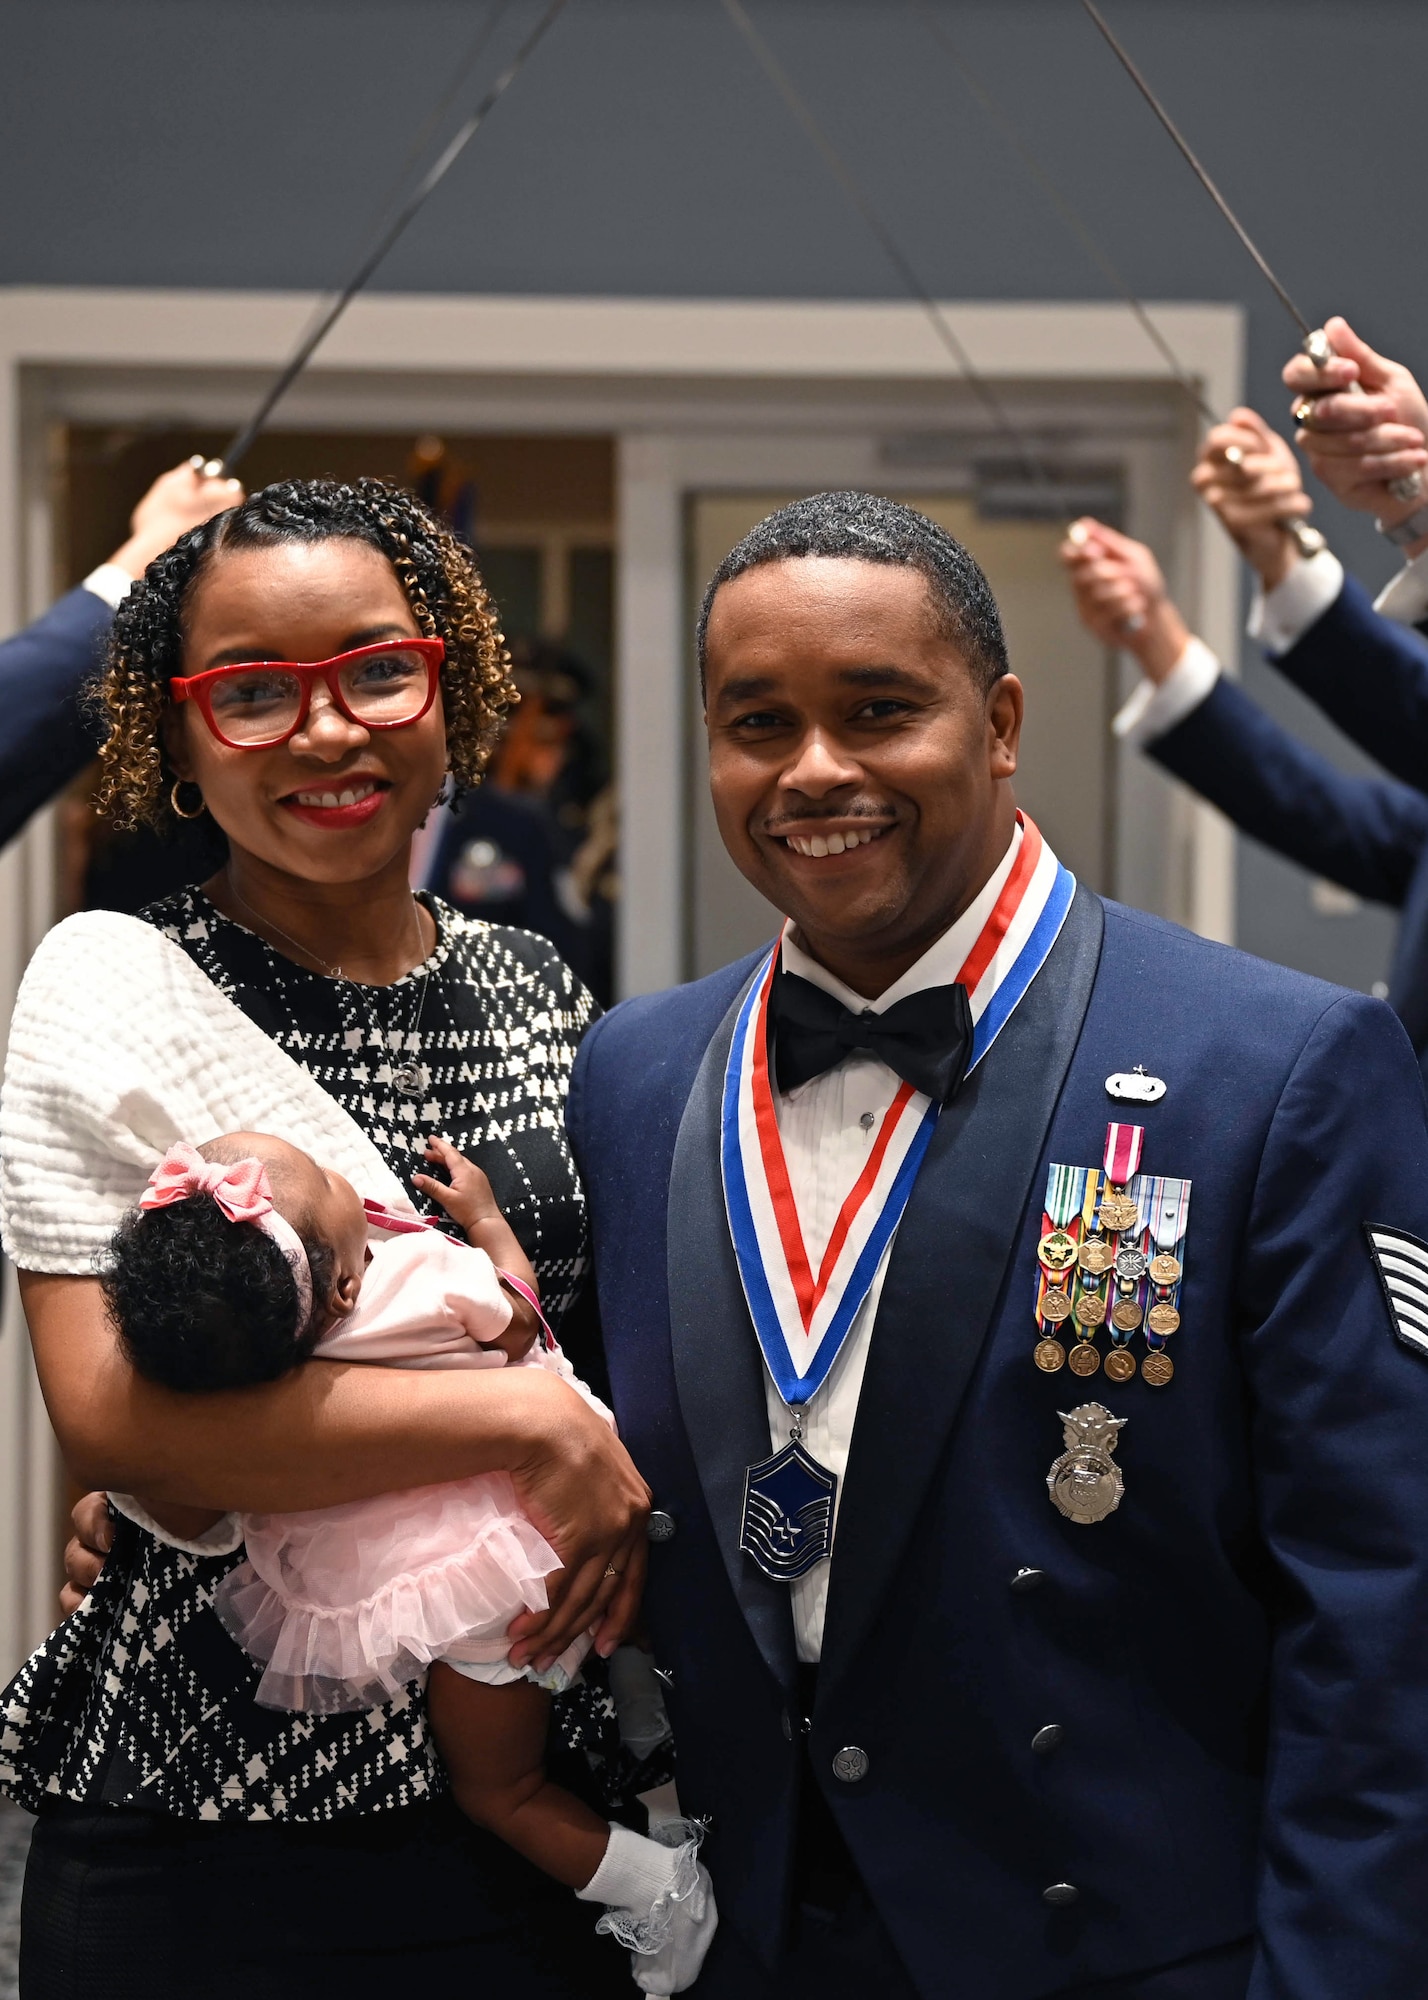 Master Sgt. select Shaun Segrow poses with his family for a photo in front of a saber cordon.